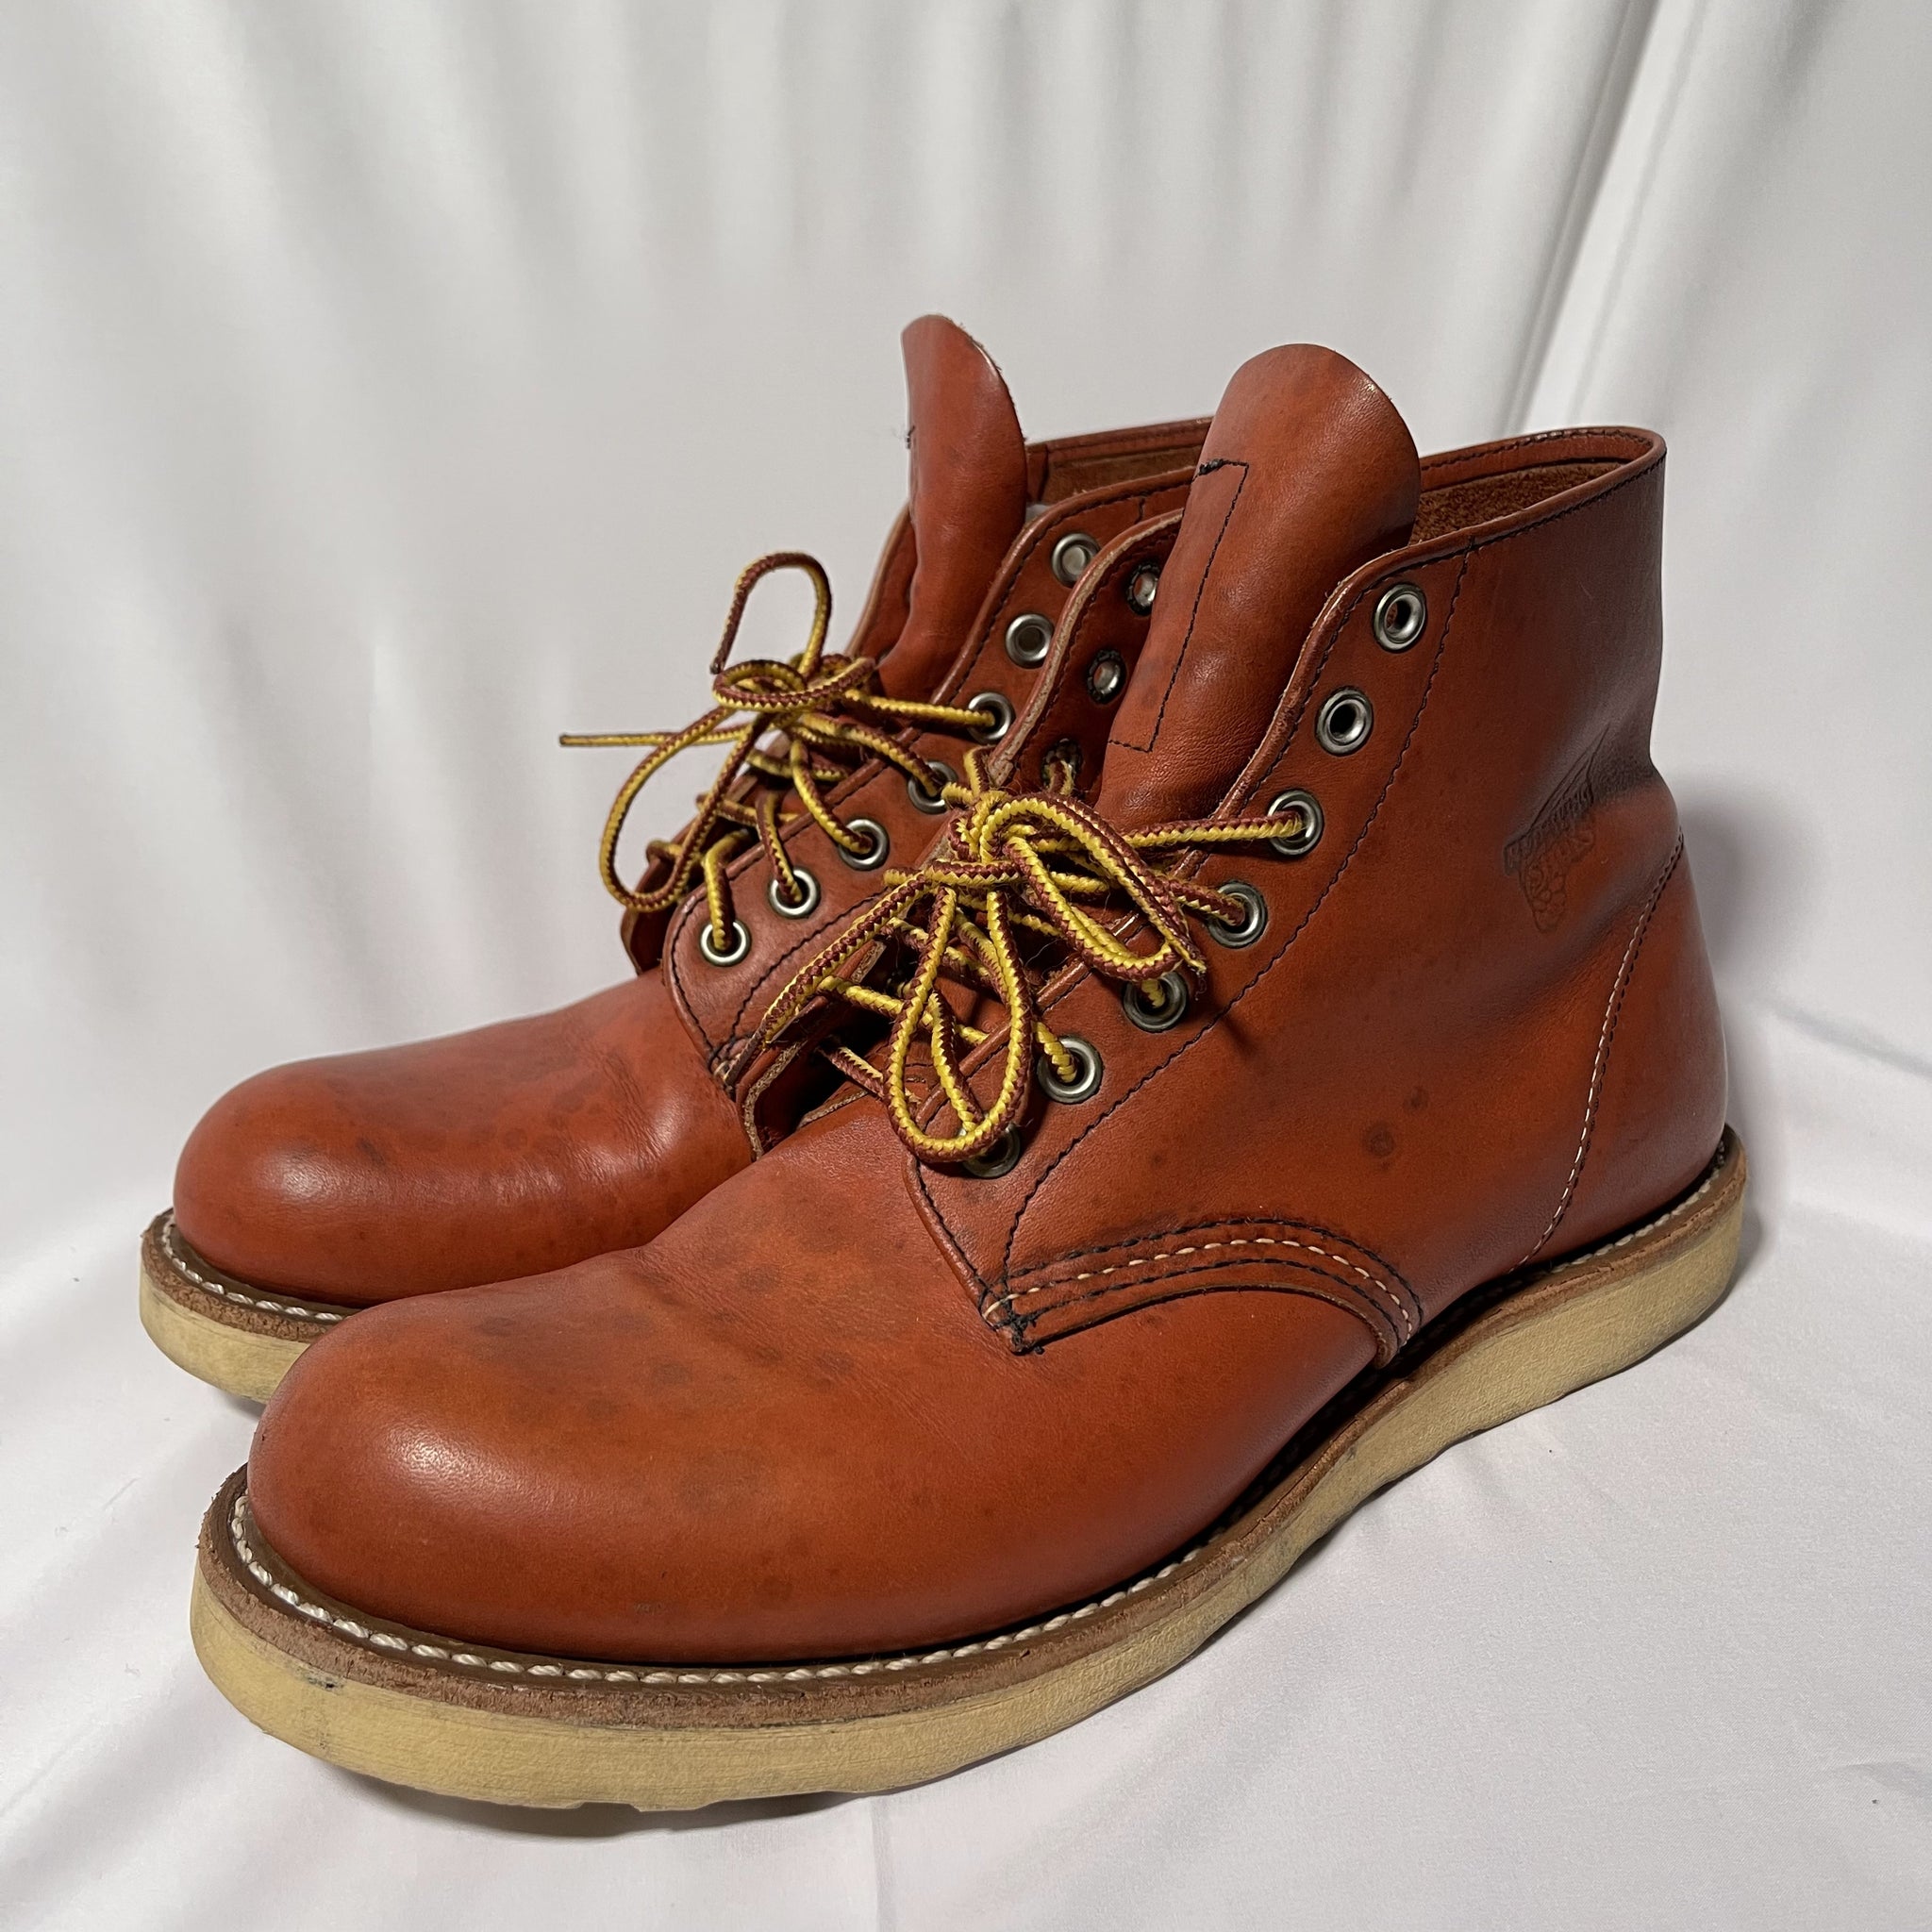 Red Wing Shoes CLASSIC ROUND STYLE NO. 8166 US 8 Eur 41.0 26.0cm "D" width